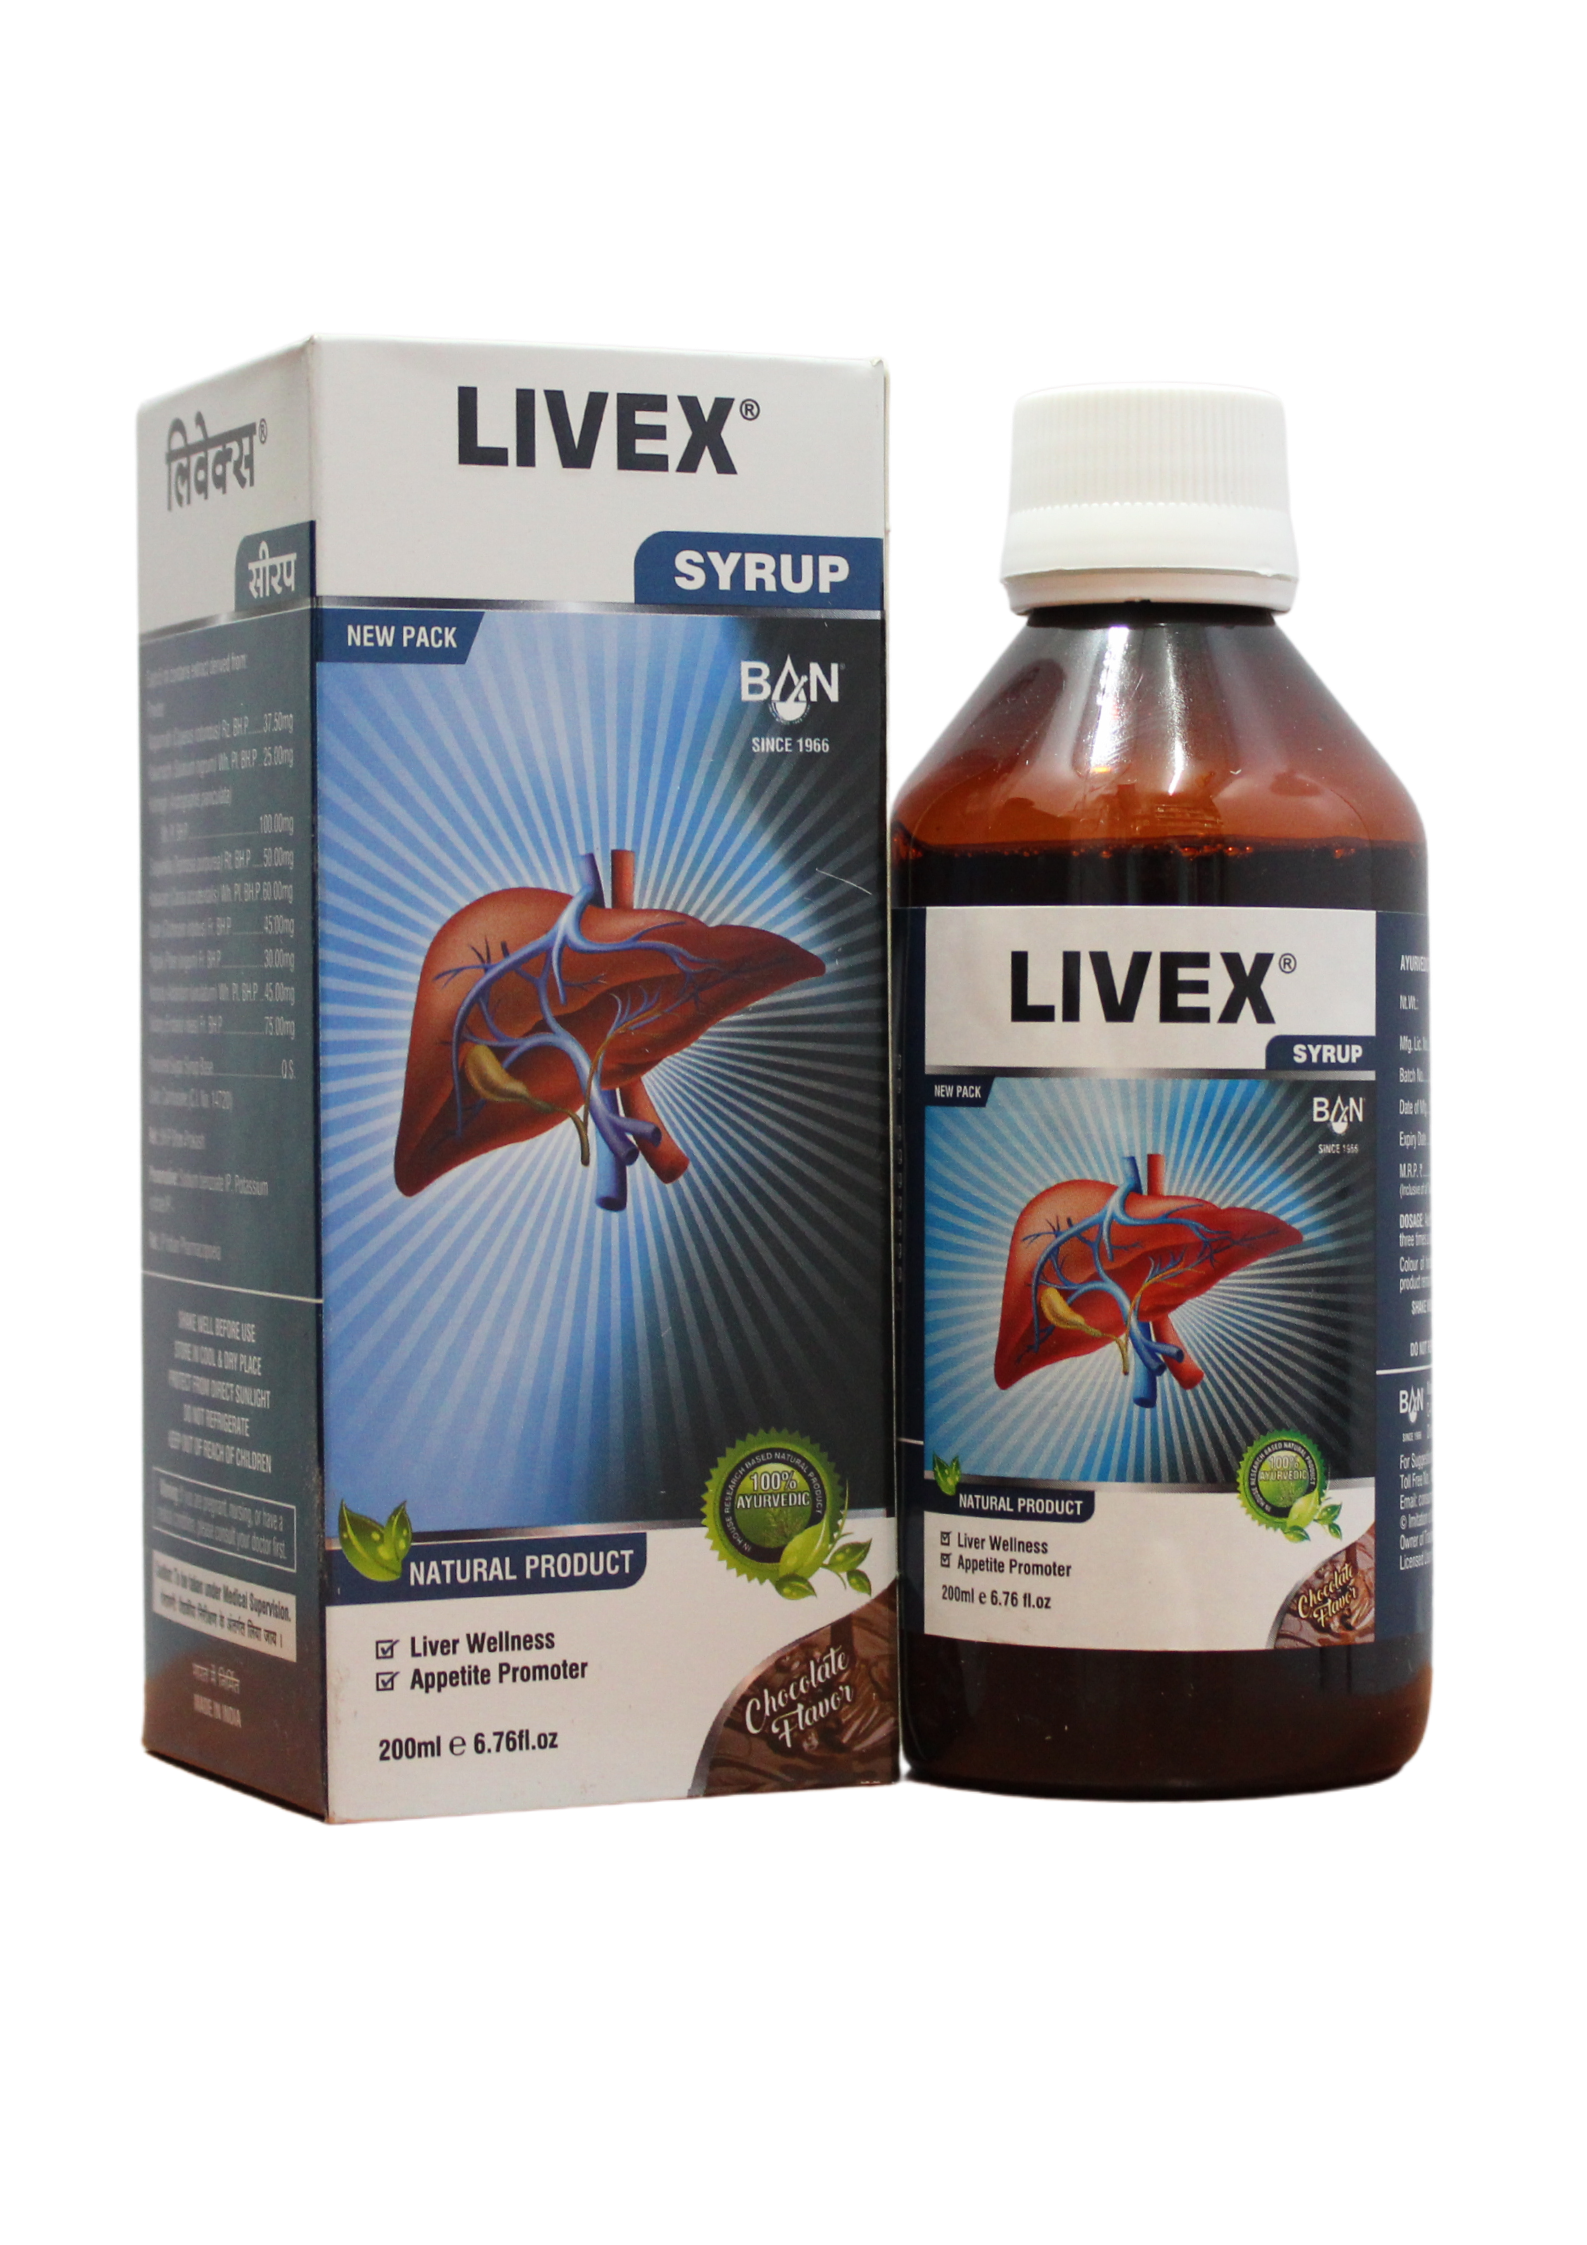 Shop Livex Syrup 200ml at price 110.00 from Banlabs Online - Ayush Care